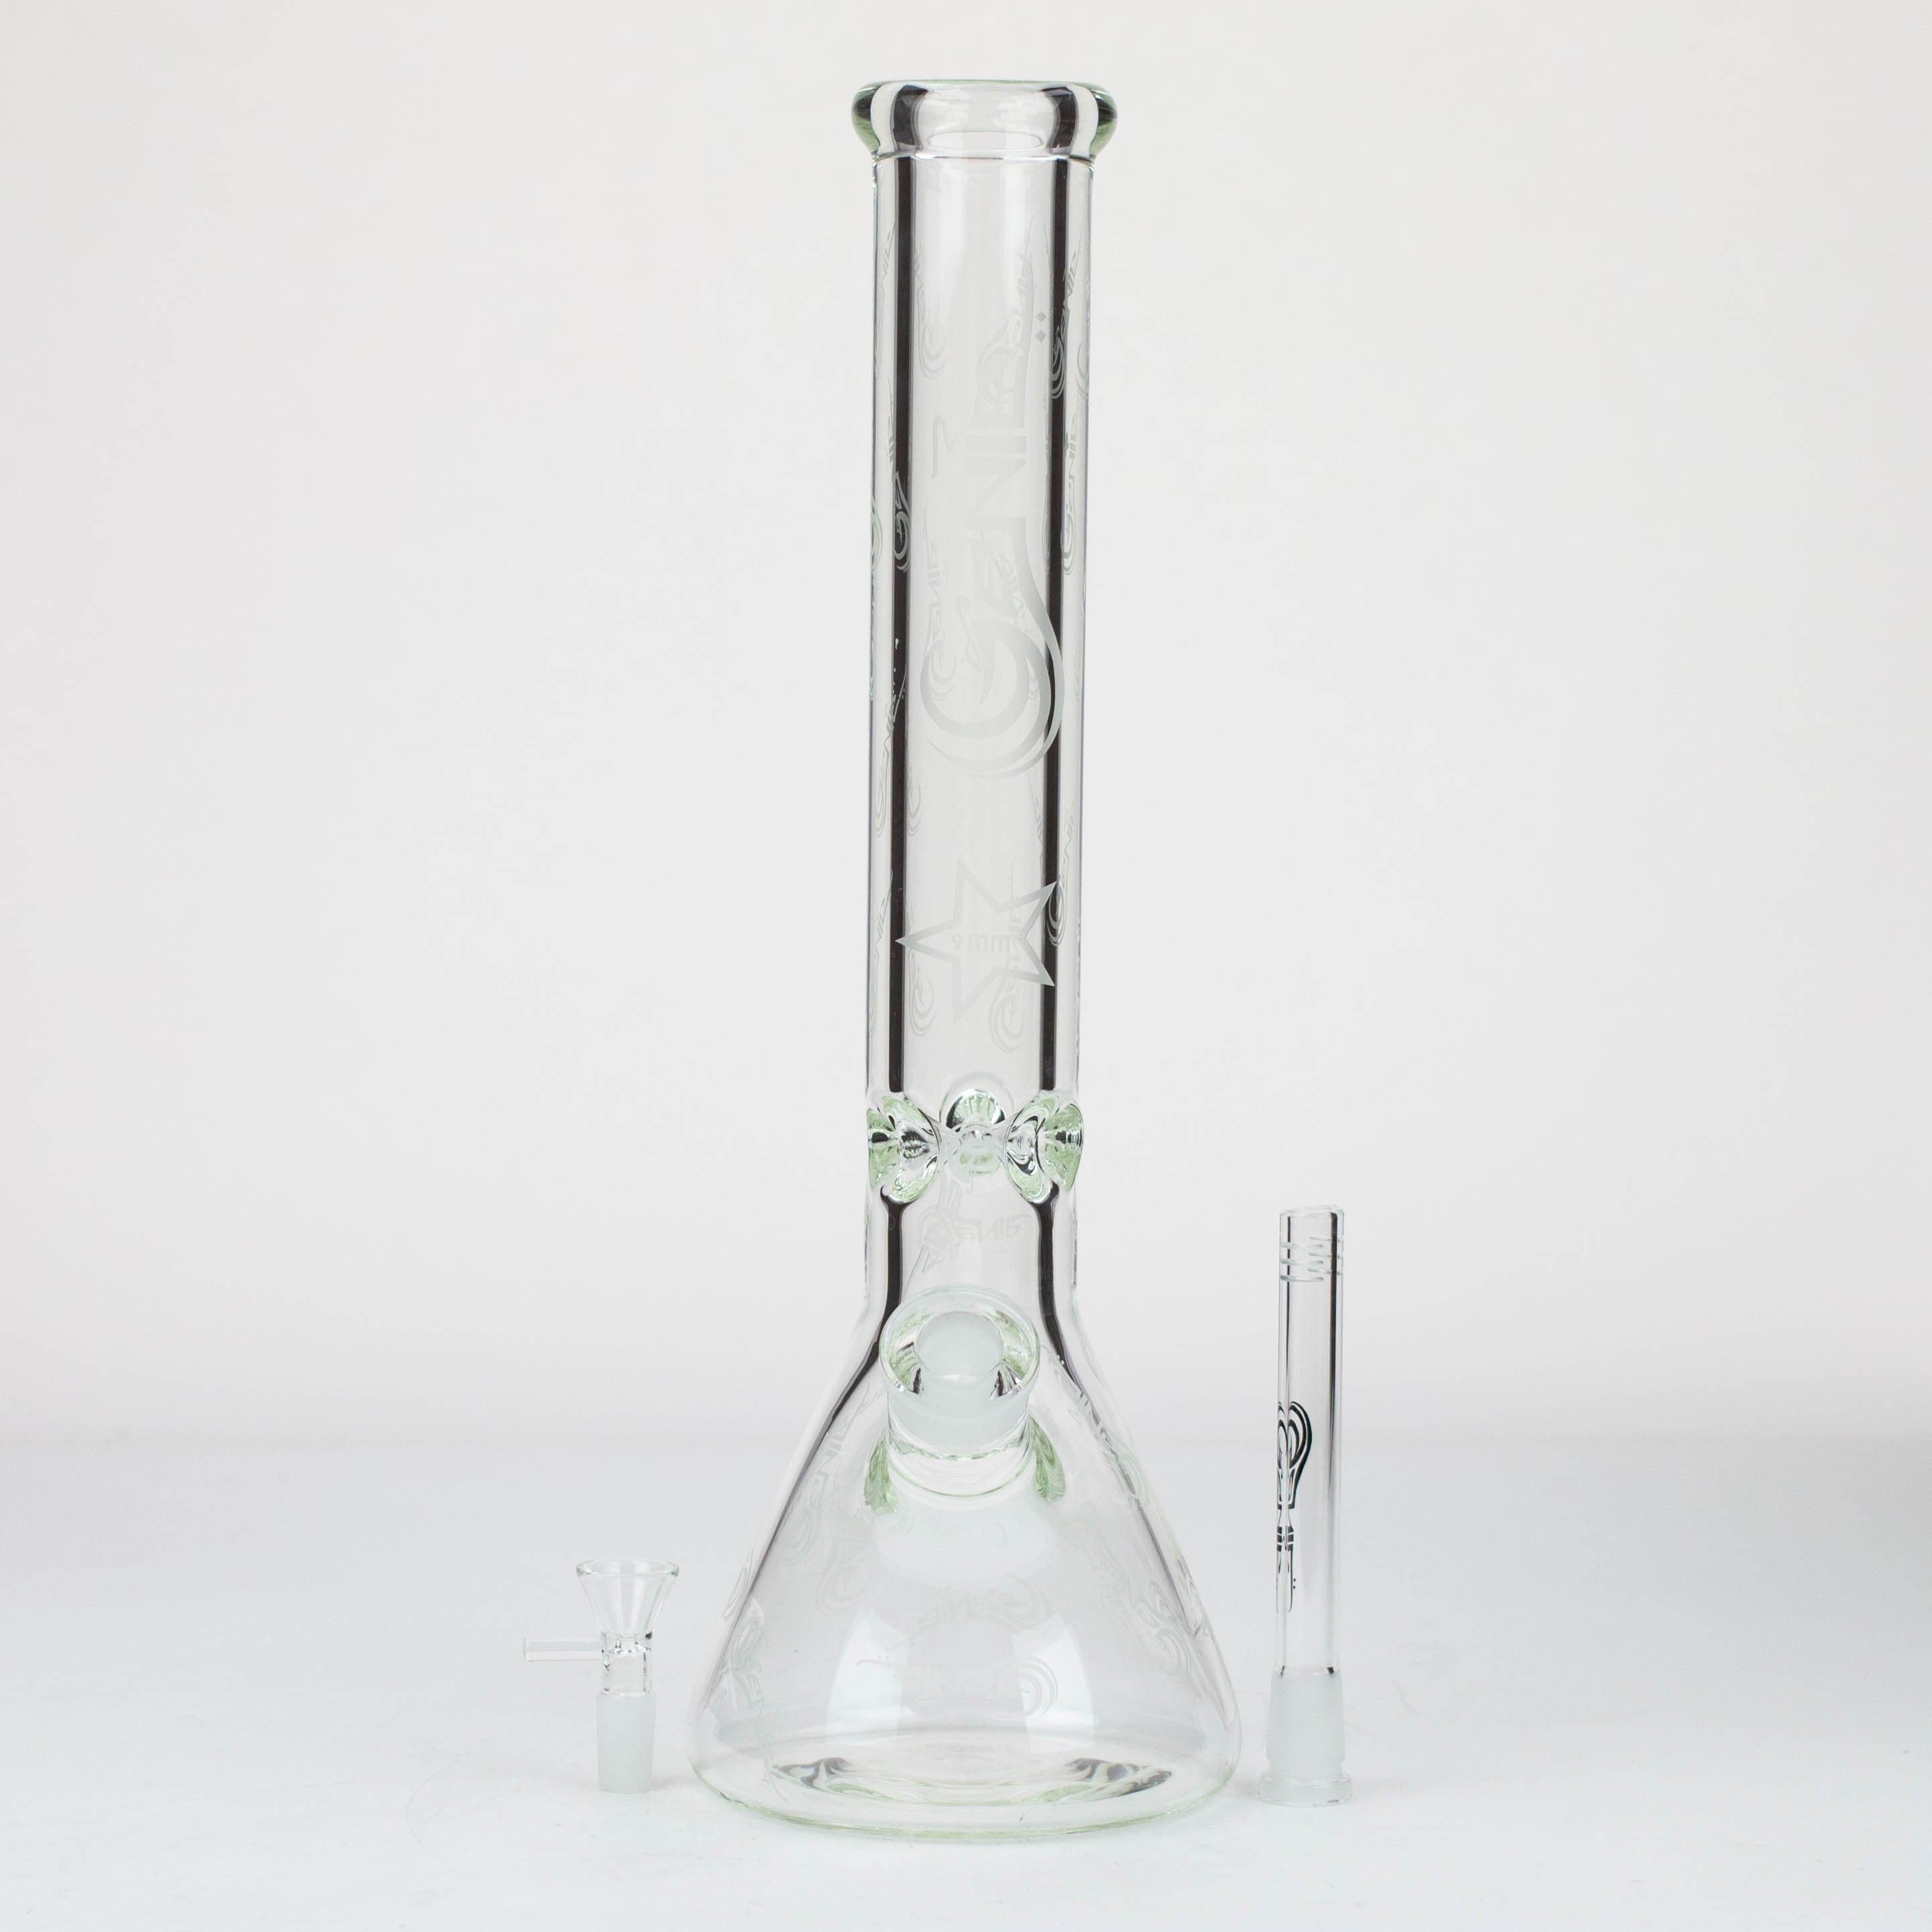 Genie pattern 9 mm clear glass water pipes 16"_8